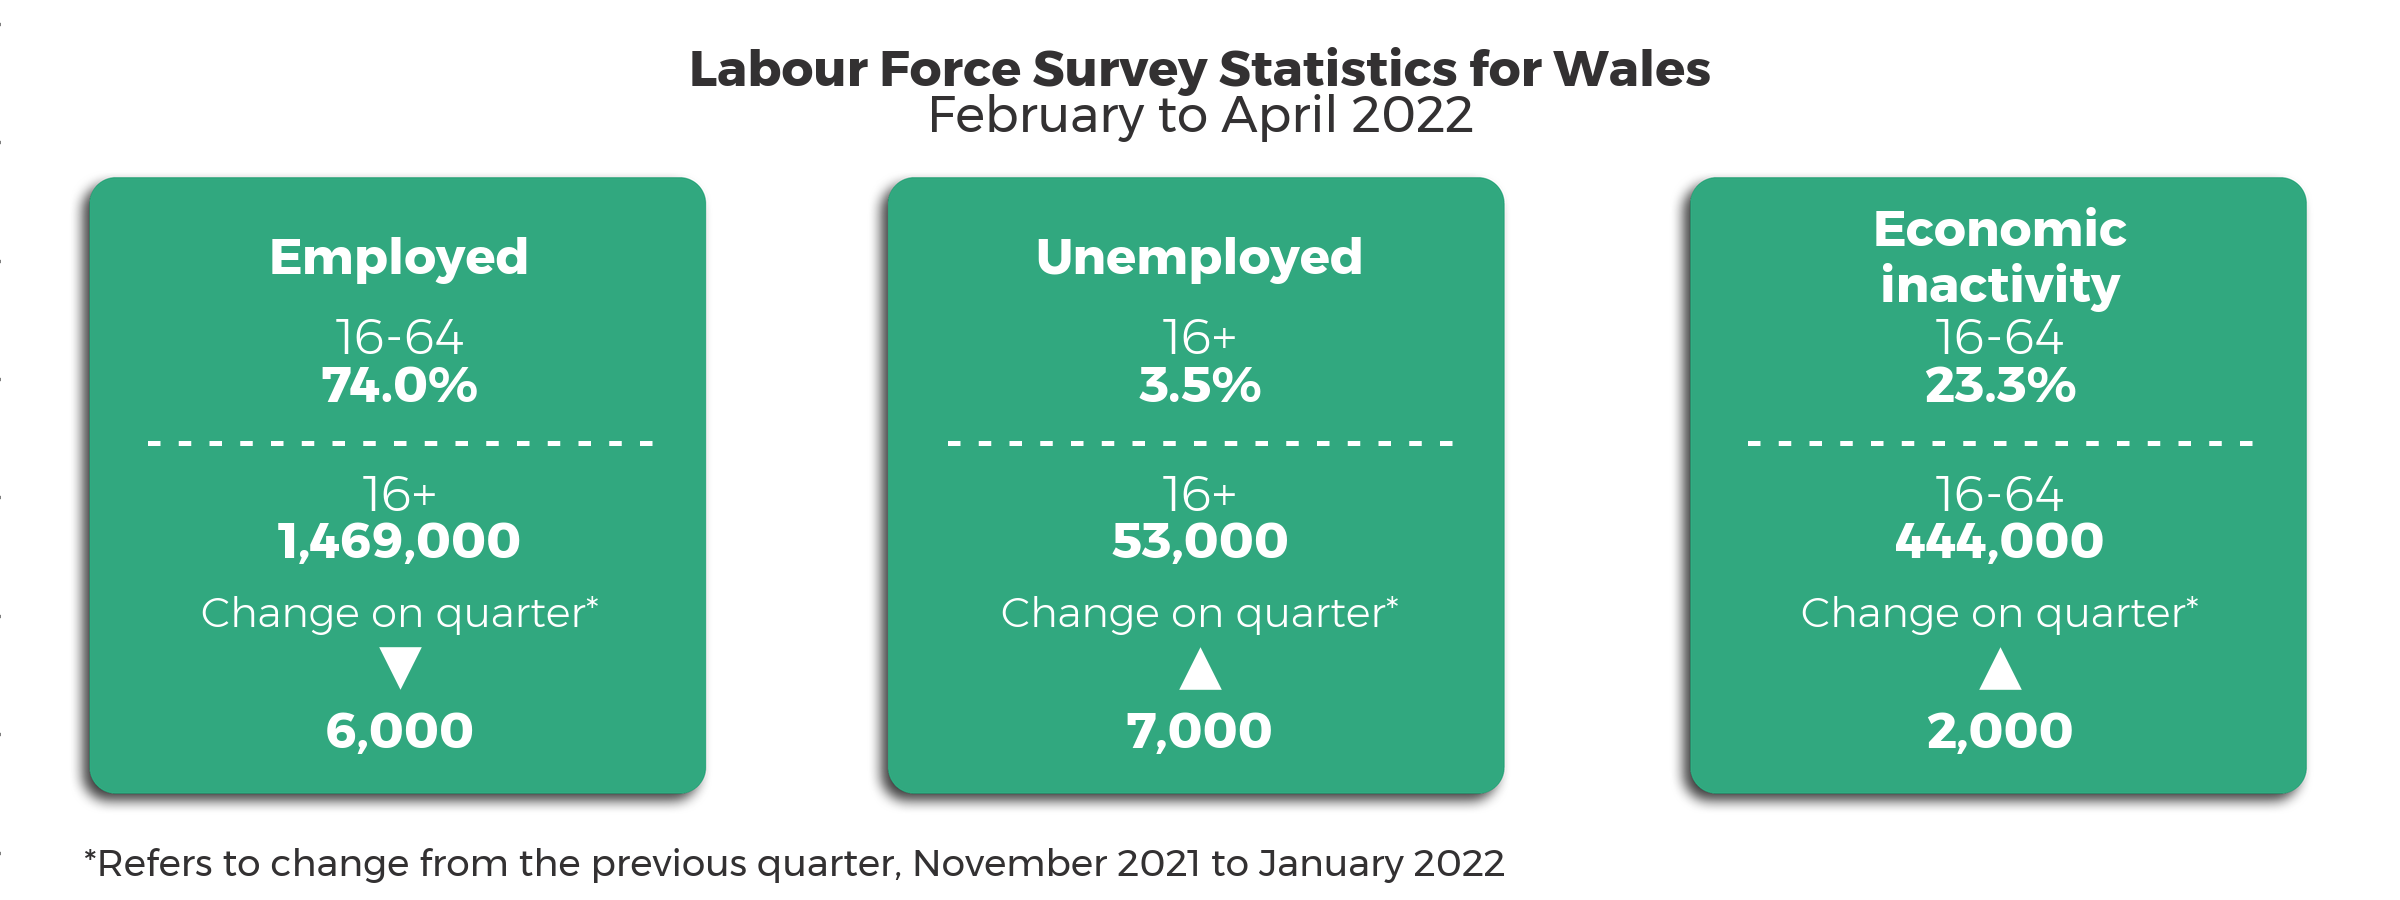 Headline statistics February 2022 to April 2022 compared to the previous quarter November 2021 to January 2022. The 16+ unemployment rate is 3.5% with 53,000 people unemployed, an increase of 7,000 from the previous quarter. The 16-64 employment rate is 74.0%. 1,469,000 people aged 16+ employed, a decrease of 6,000 from the previous quarter. The 16-64 economic inactivity rate is 23.3% with 444,000 people economically inactive, an increase of 2,000 on the previous quarter.